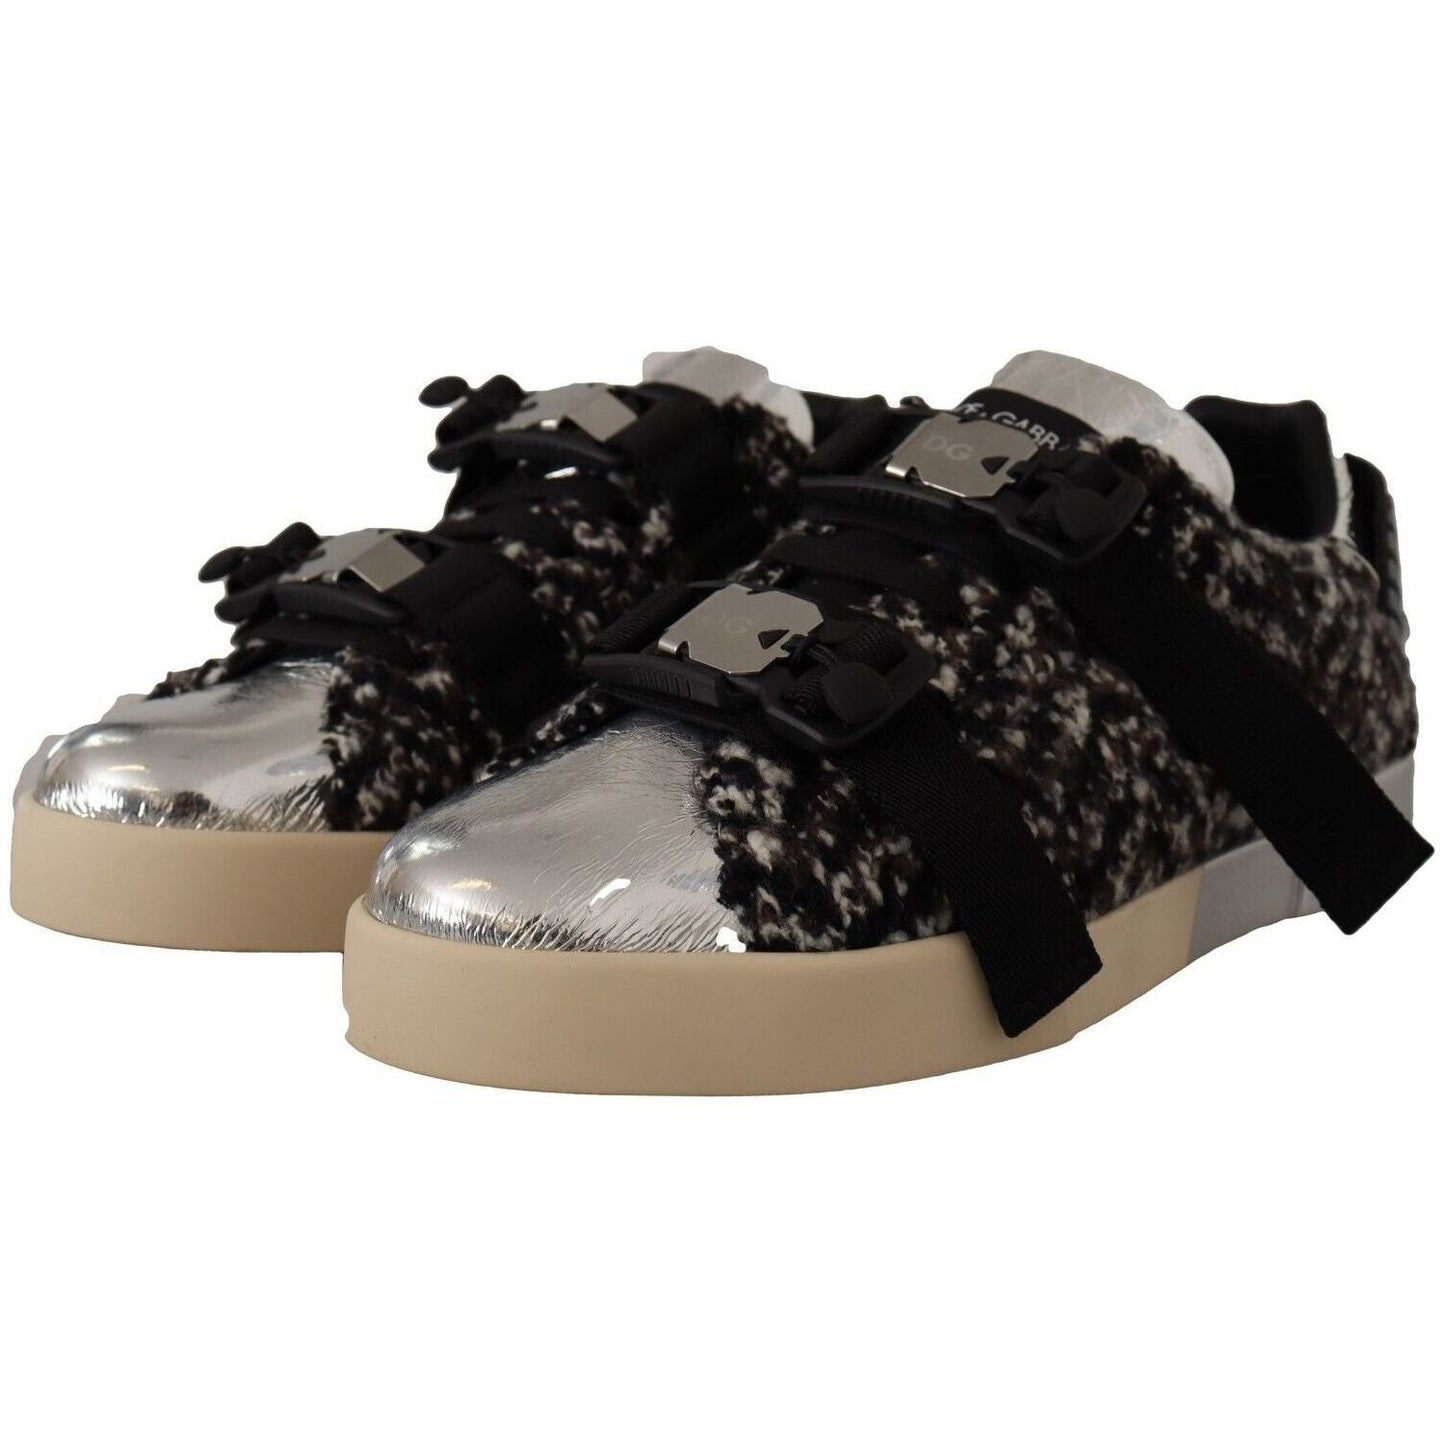 Dolce & Gabbana Silver Elegance Leather Sneakers silver-leather-brown-cotton-wool-sneakers-shoes s-l1600-7-4-629750bc-808.jpg